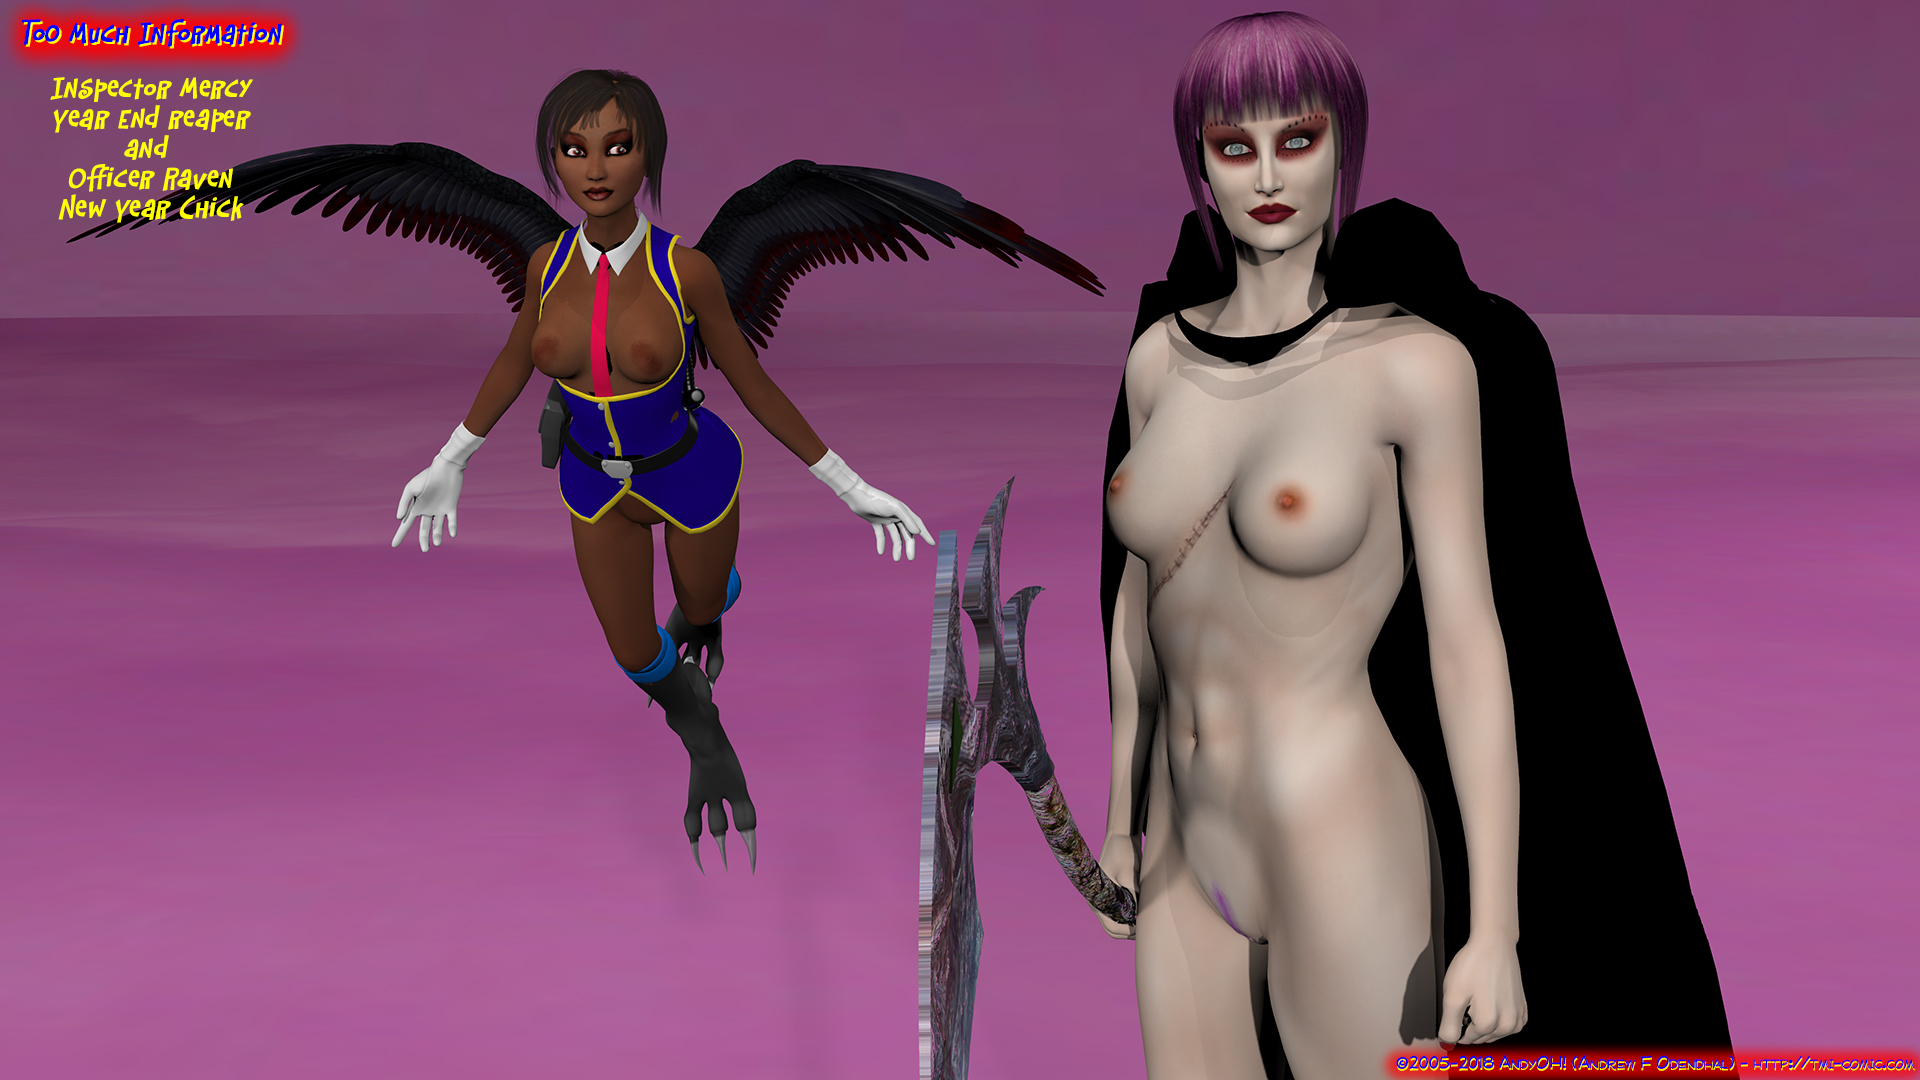 Mercy_and_Raven-190101_kfRNt4Sc